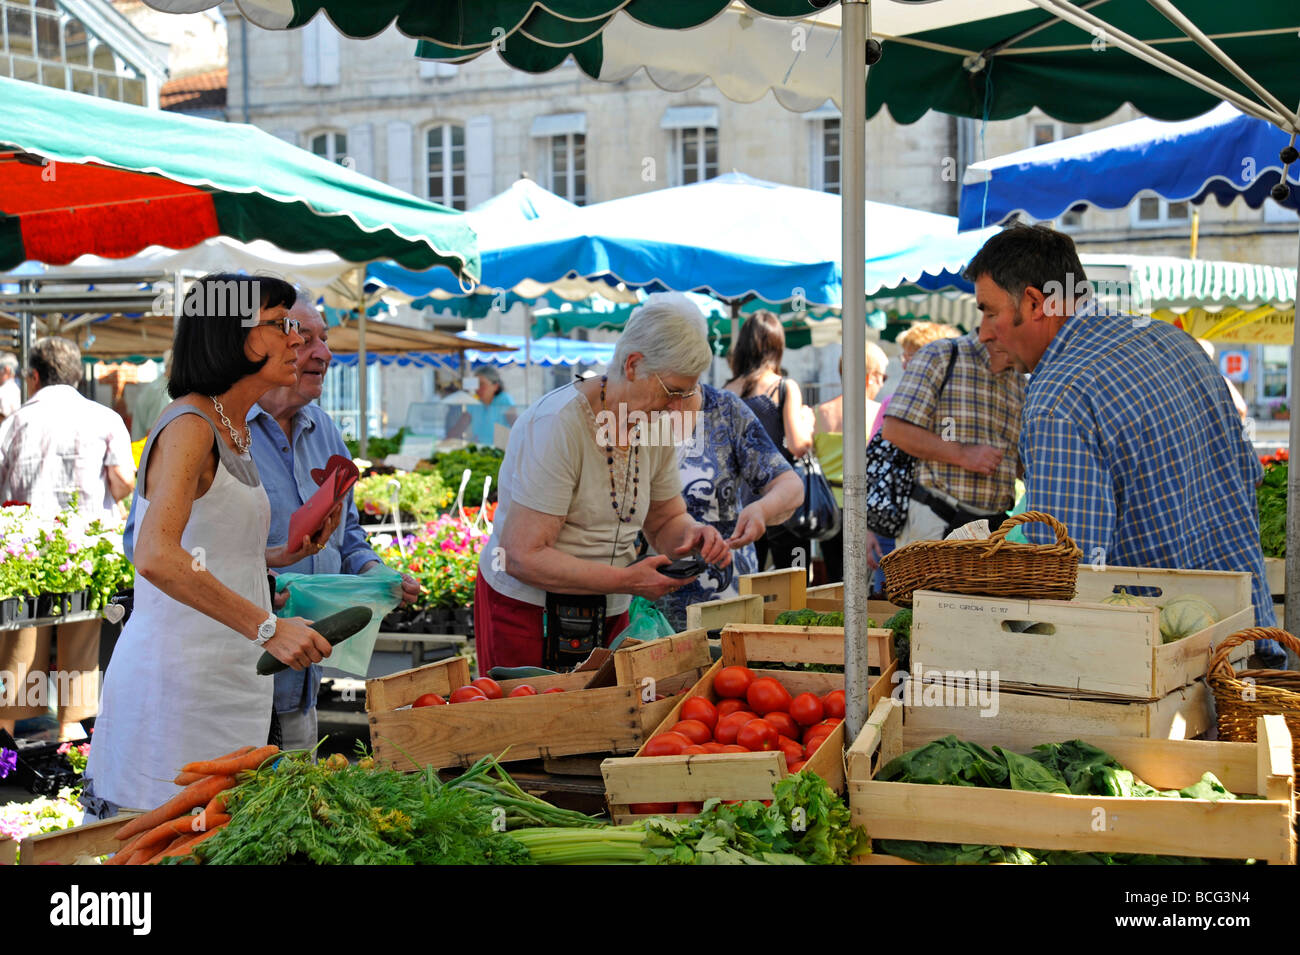 Busy market stalls on sunny day in Niort market, France Stock Photo